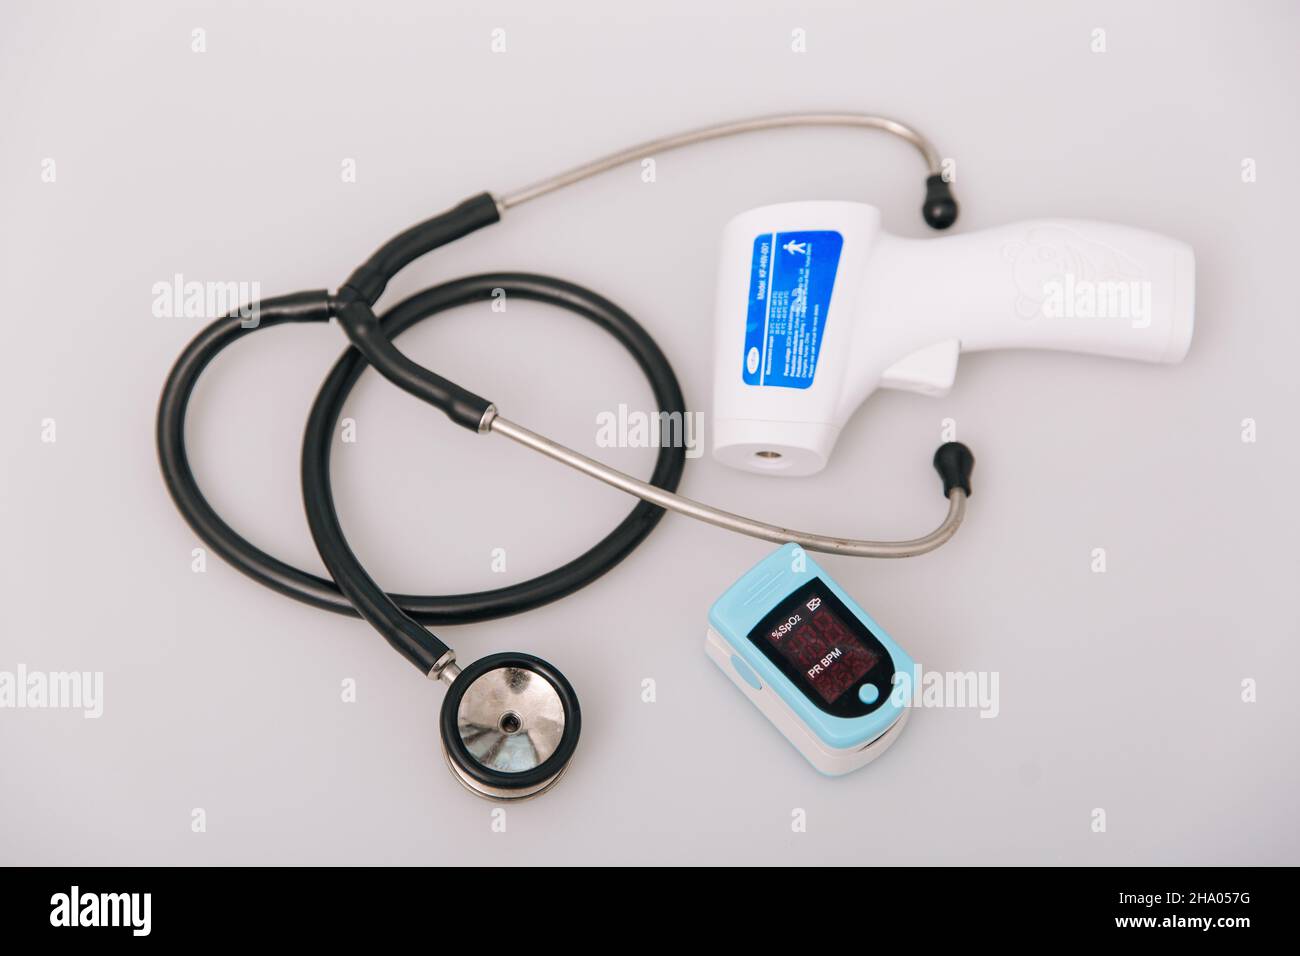 Stethoscope, pulse oximeter and thermometer gun on white background. Phonendoscope. Infrared isometric thermometer gun to check body temperature for Stock Photo